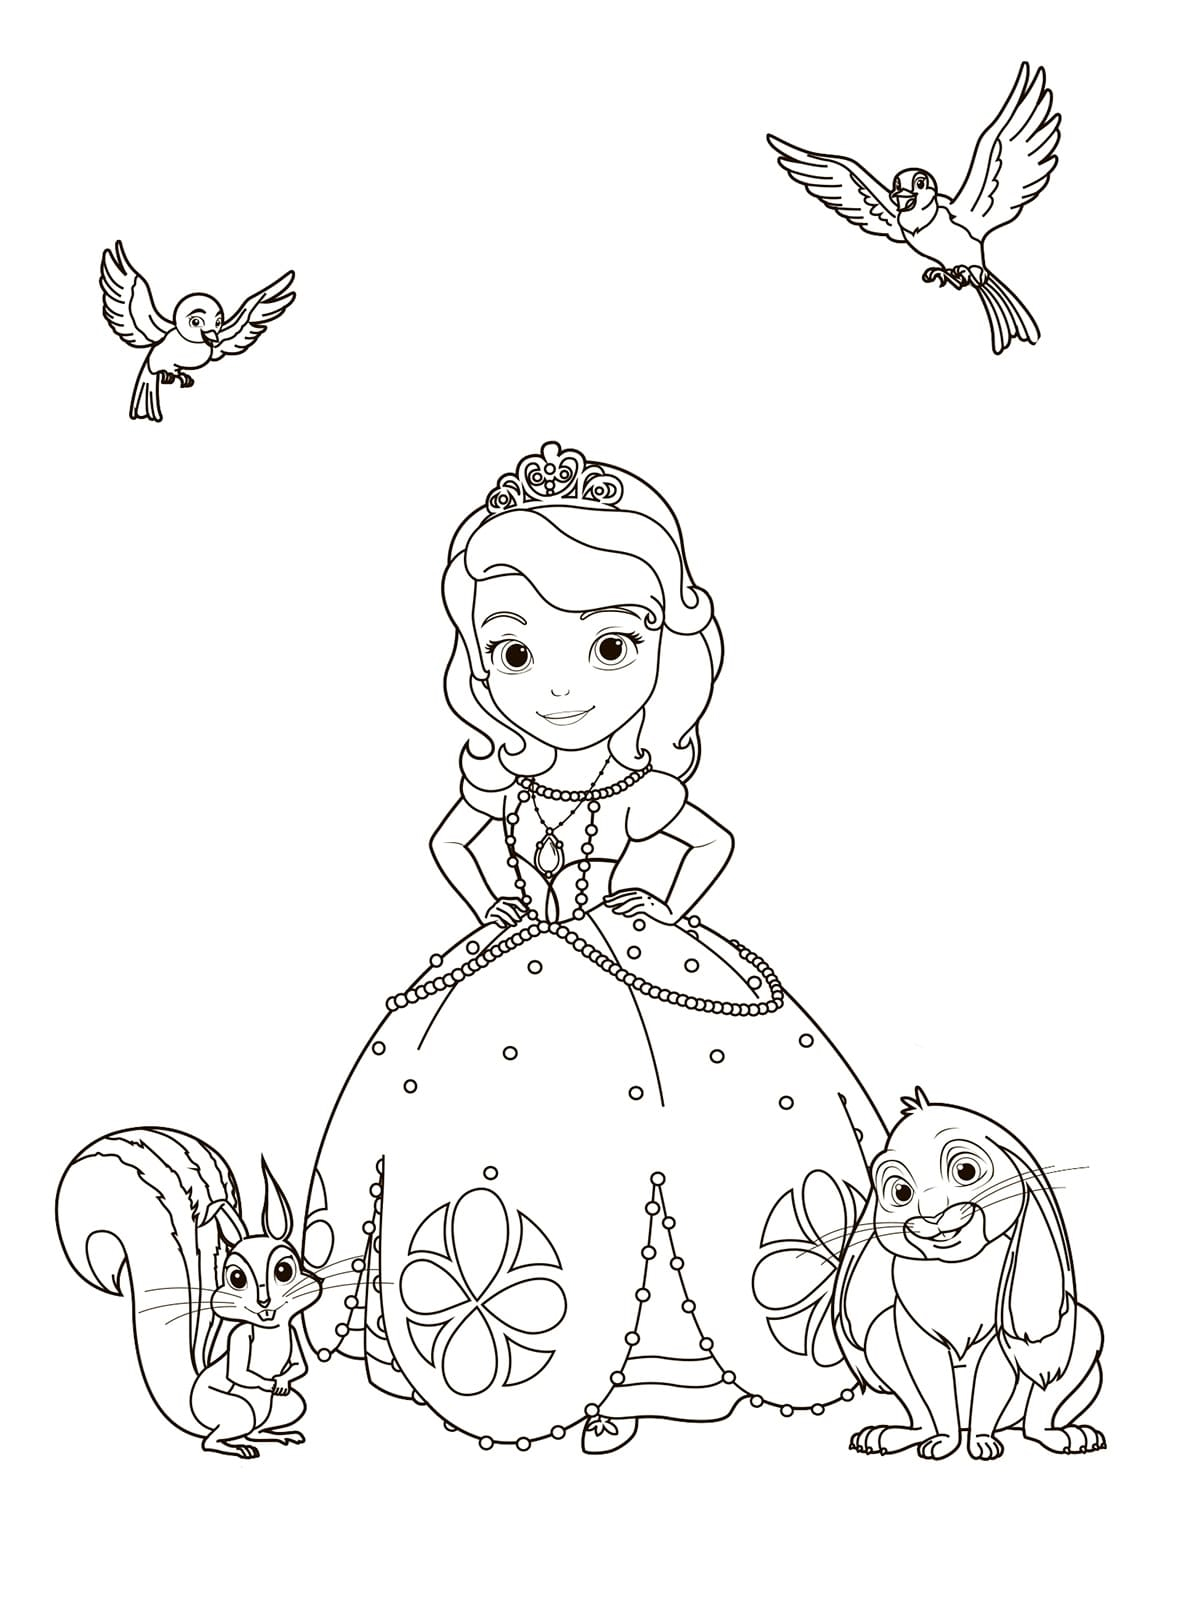 Coloring page Sofia the First Princess Sofia and her friends